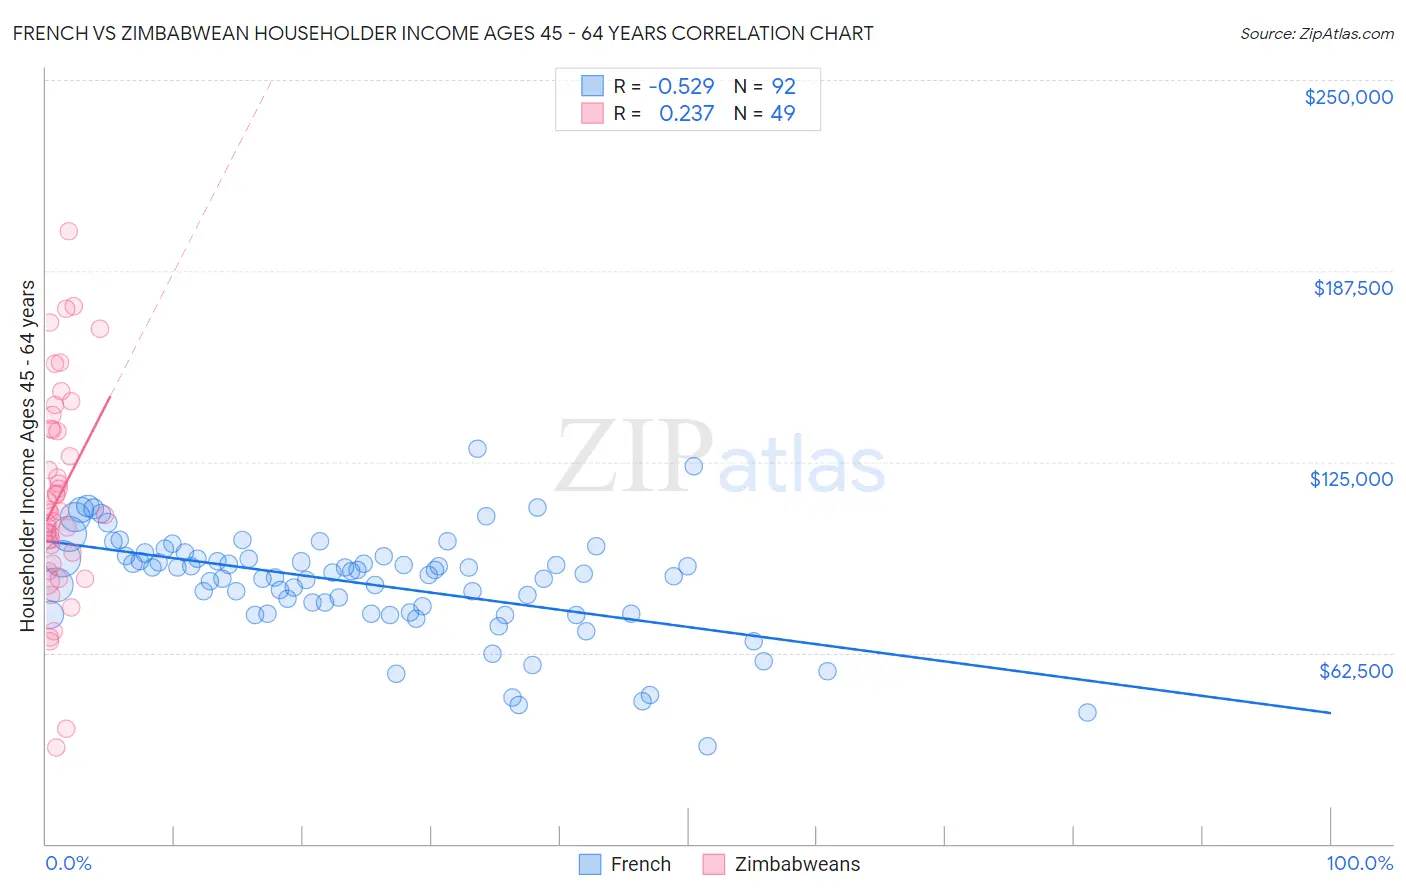 French vs Zimbabwean Householder Income Ages 45 - 64 years